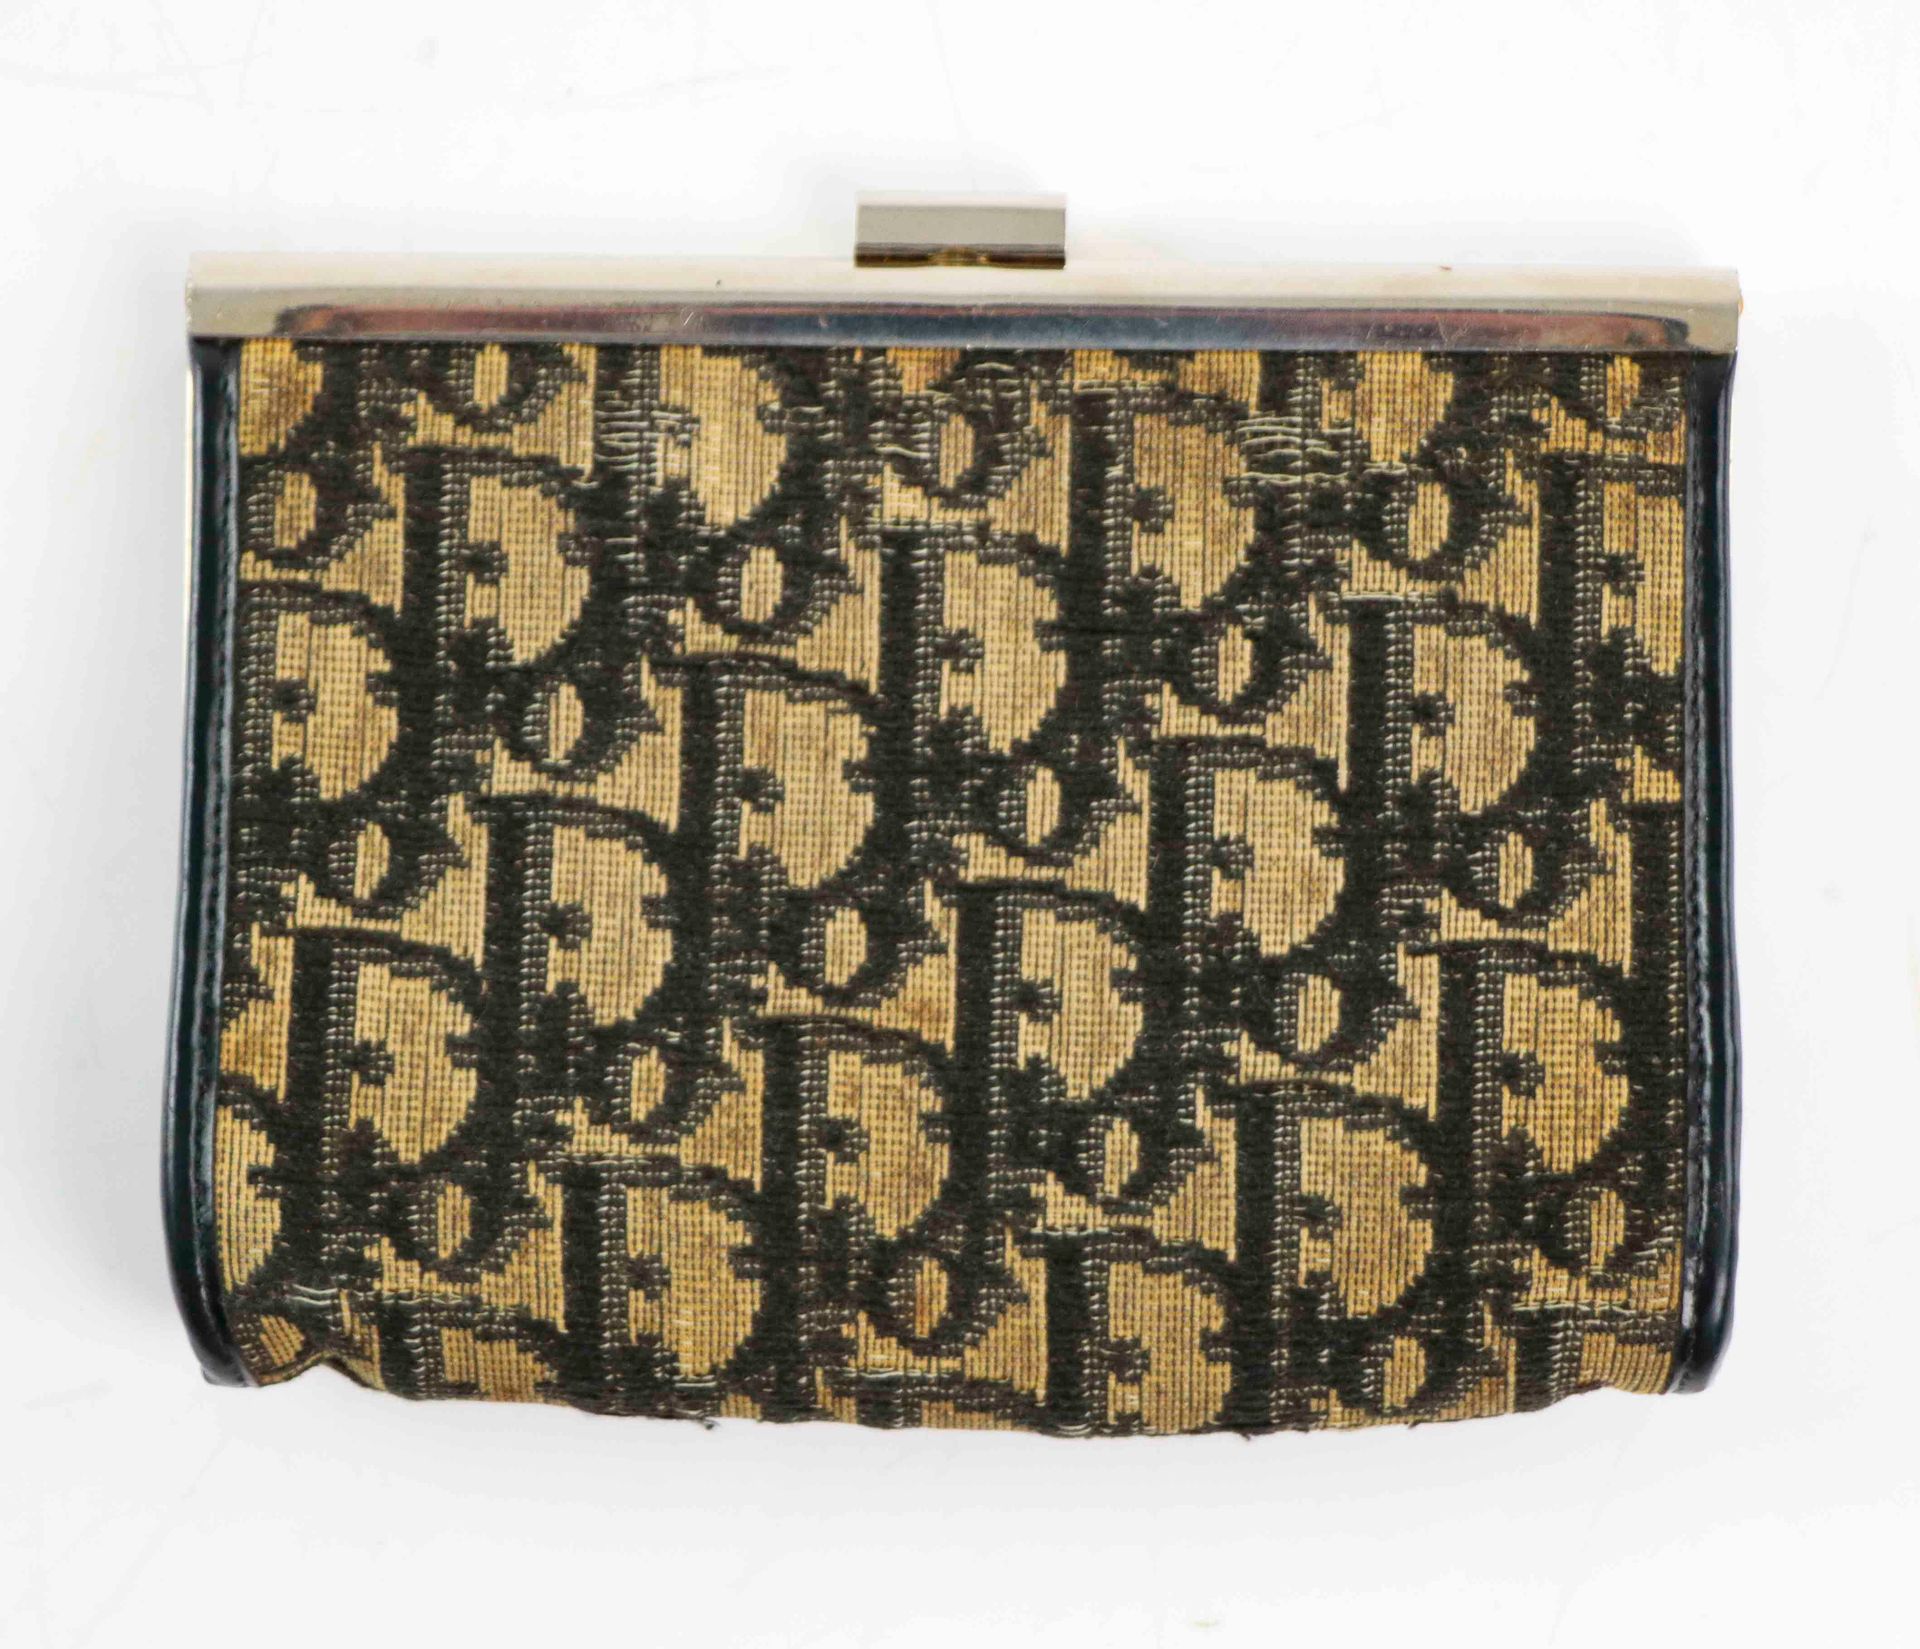 Null Christian DIOR. Purse in monogrammed canvas and black leather